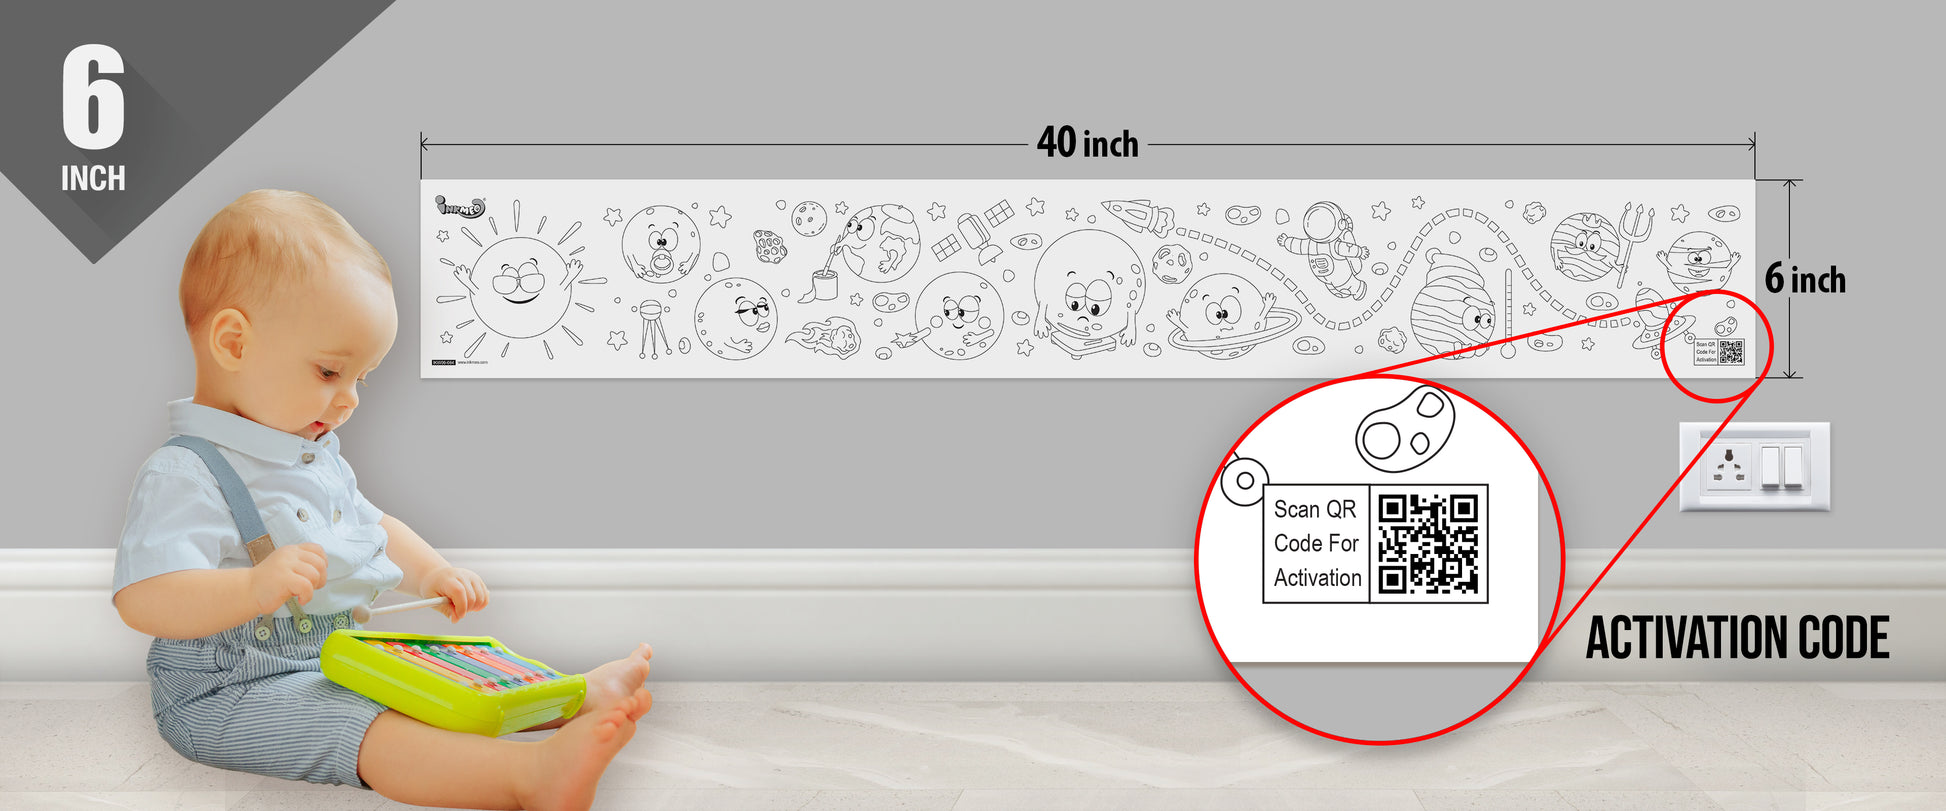 The image depicts a 6*40-inch roll adhered to the wall with a baby playing nearby, and the activation code is zoomed in separately.